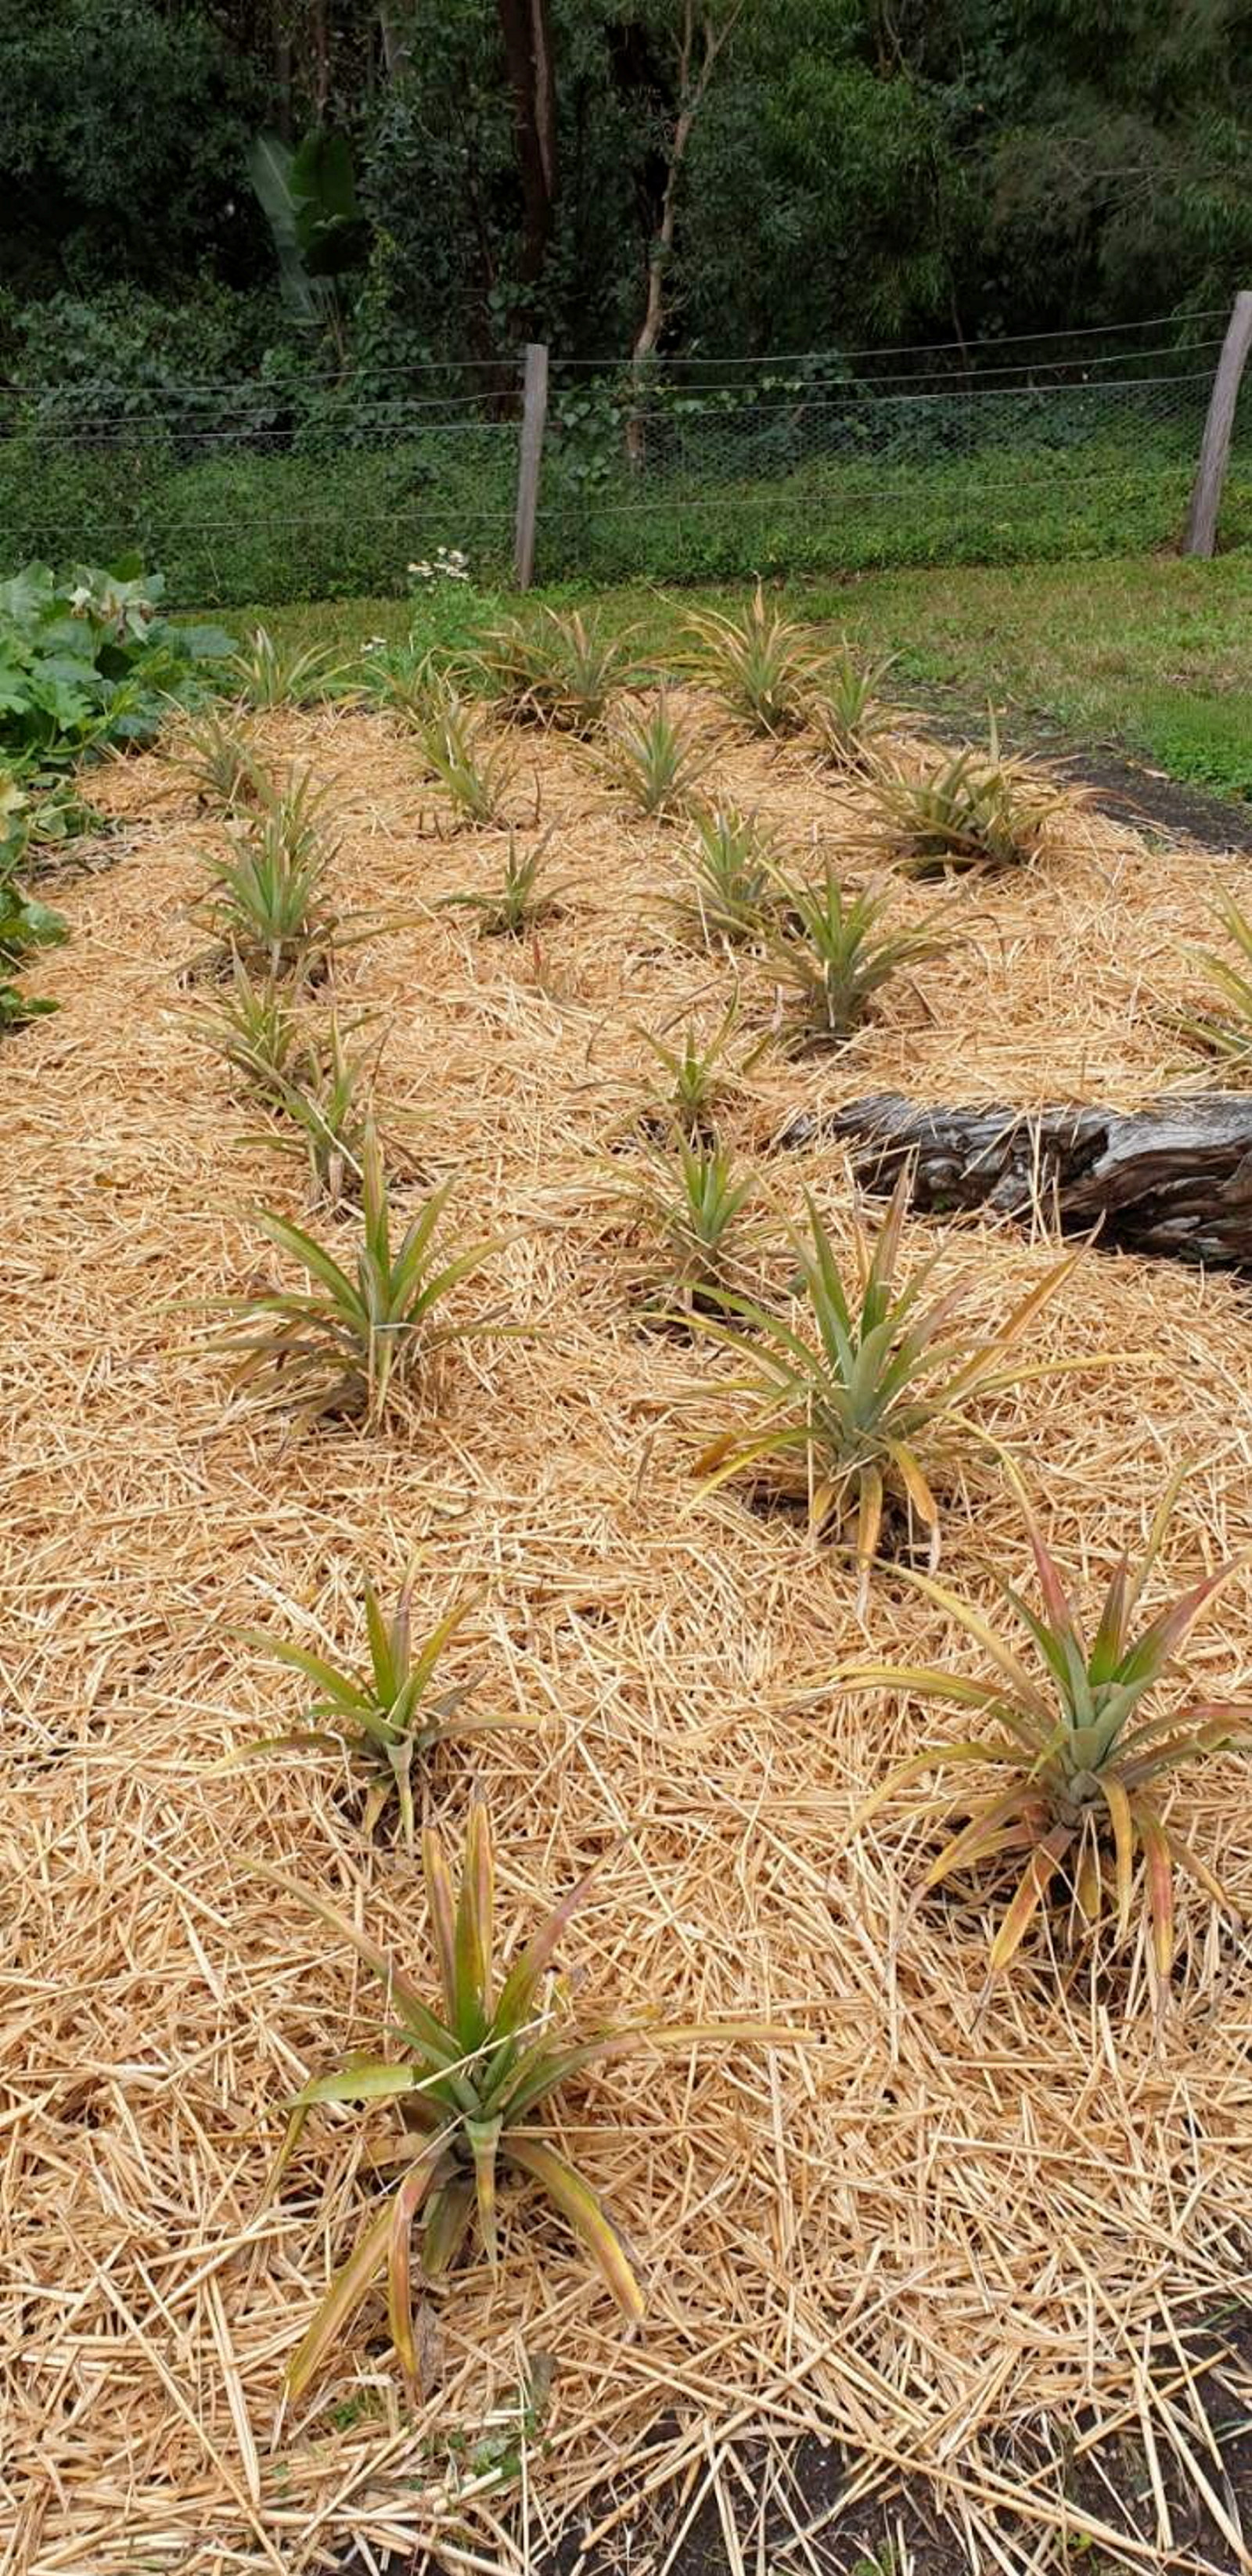 Rows of pineapple plants.